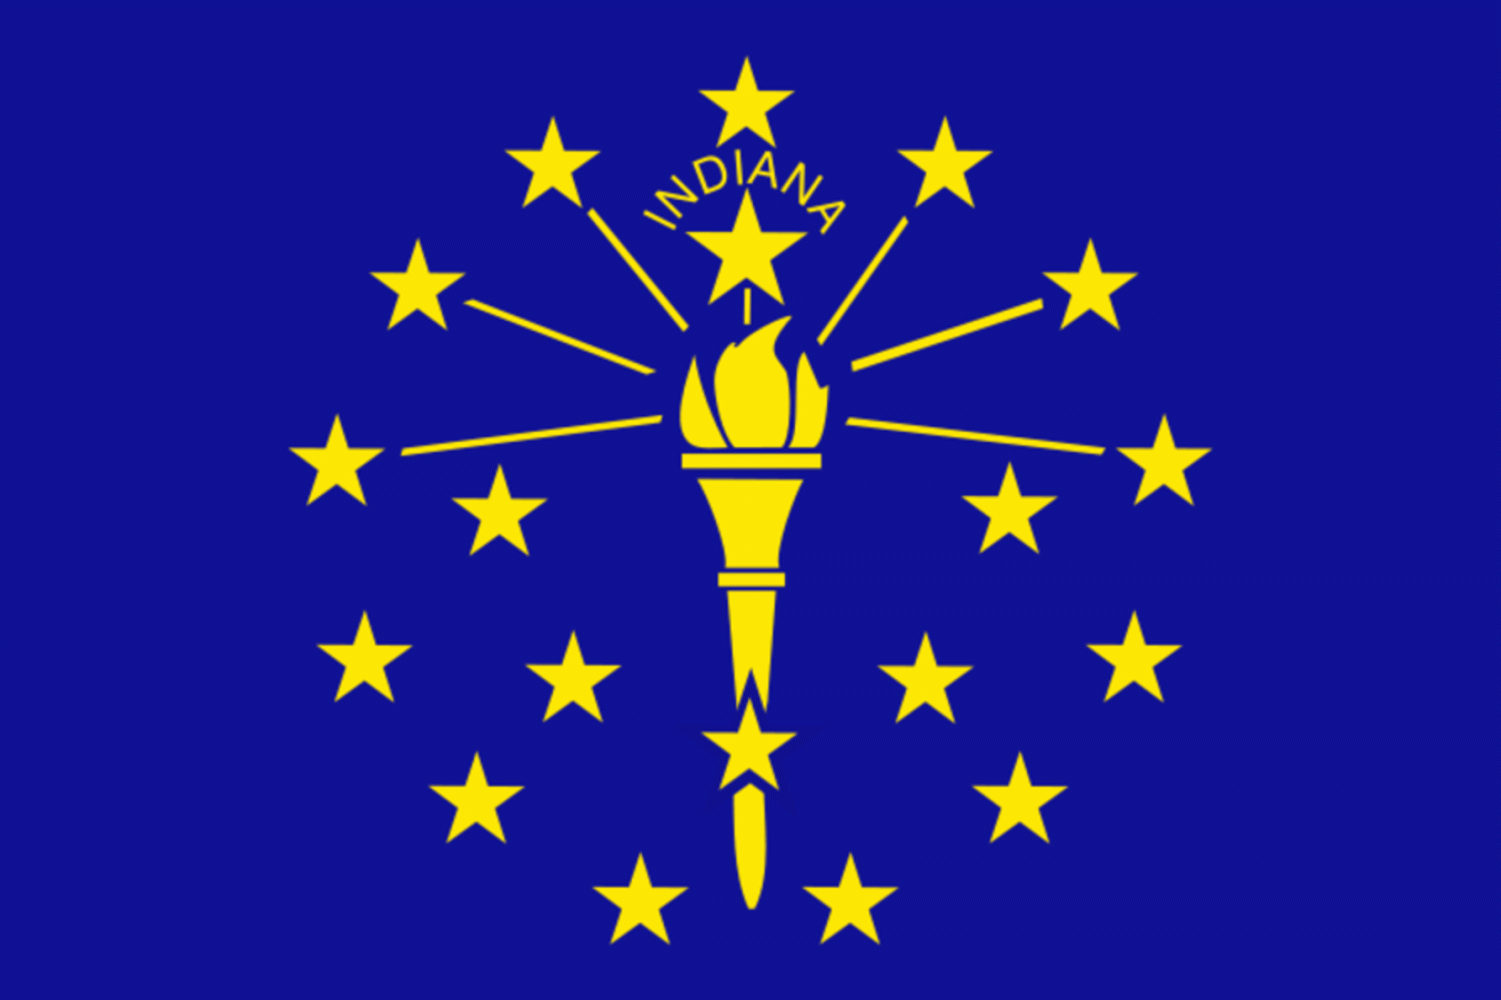 Indiana has officially introduced the state abortion ban leaving some citizens confused.